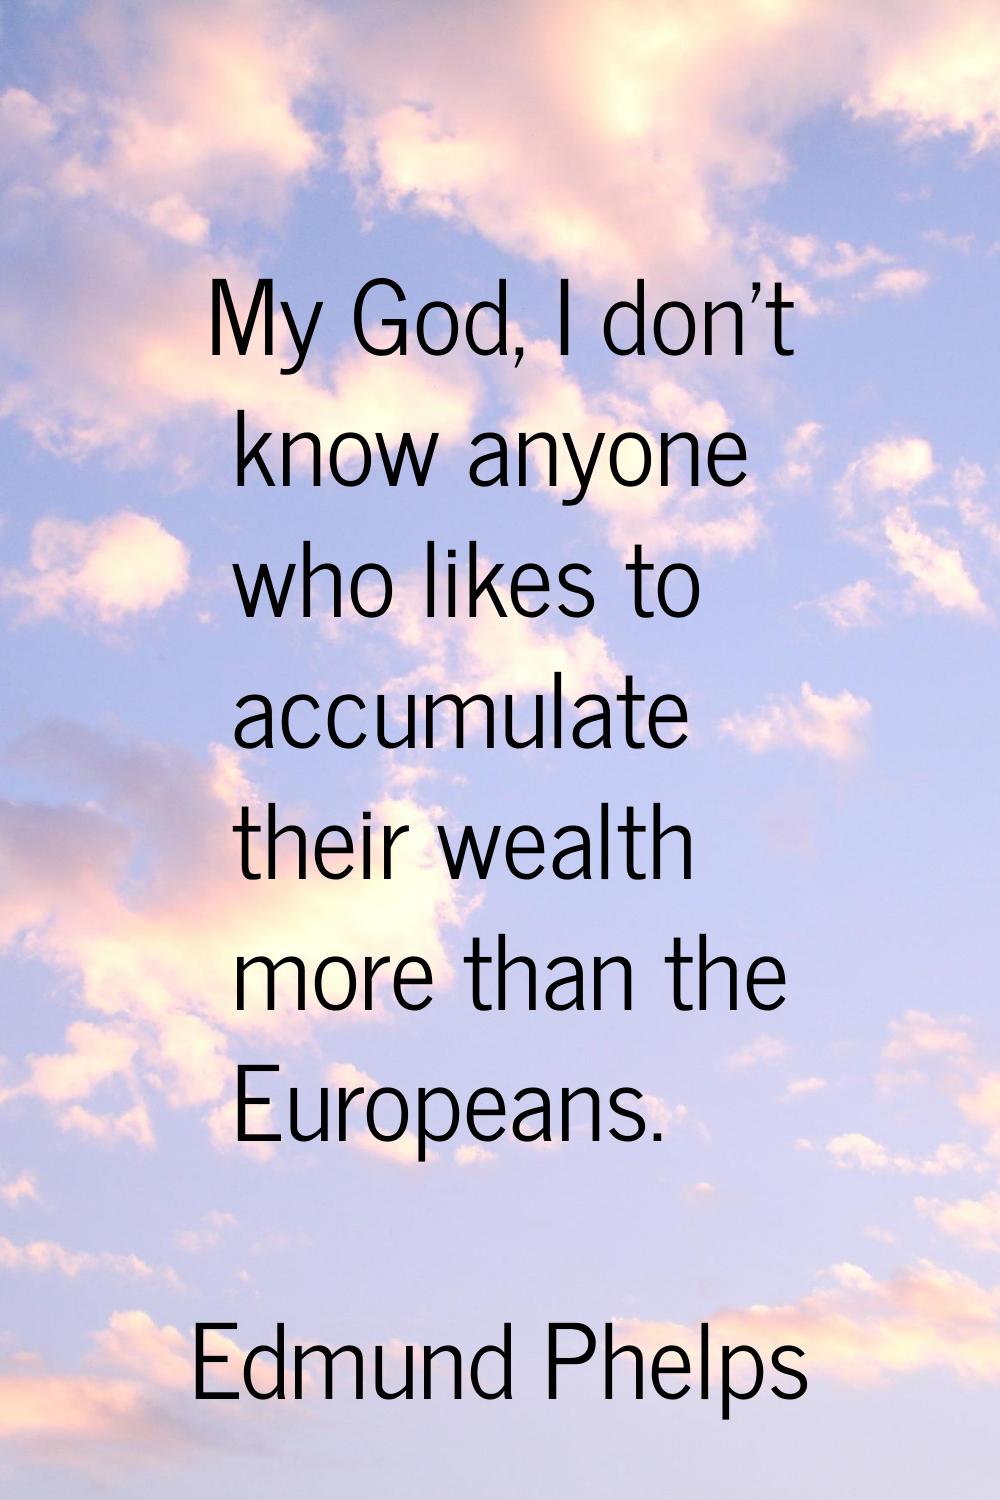 My God, I don't know anyone who likes to accumulate their wealth more than the Europeans.